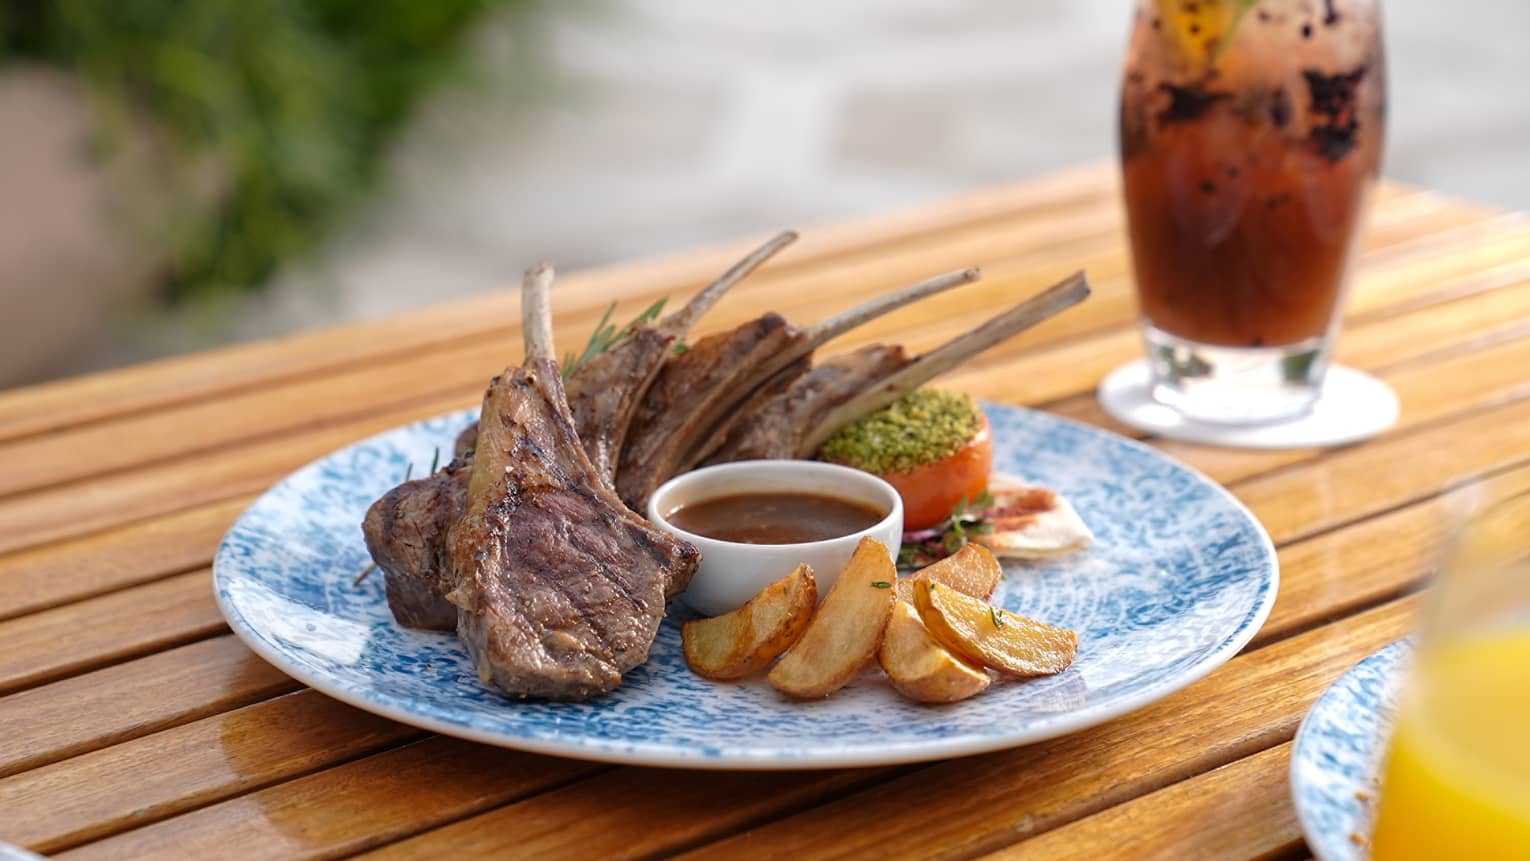 Lamb chops on a plate next to a cocktail.